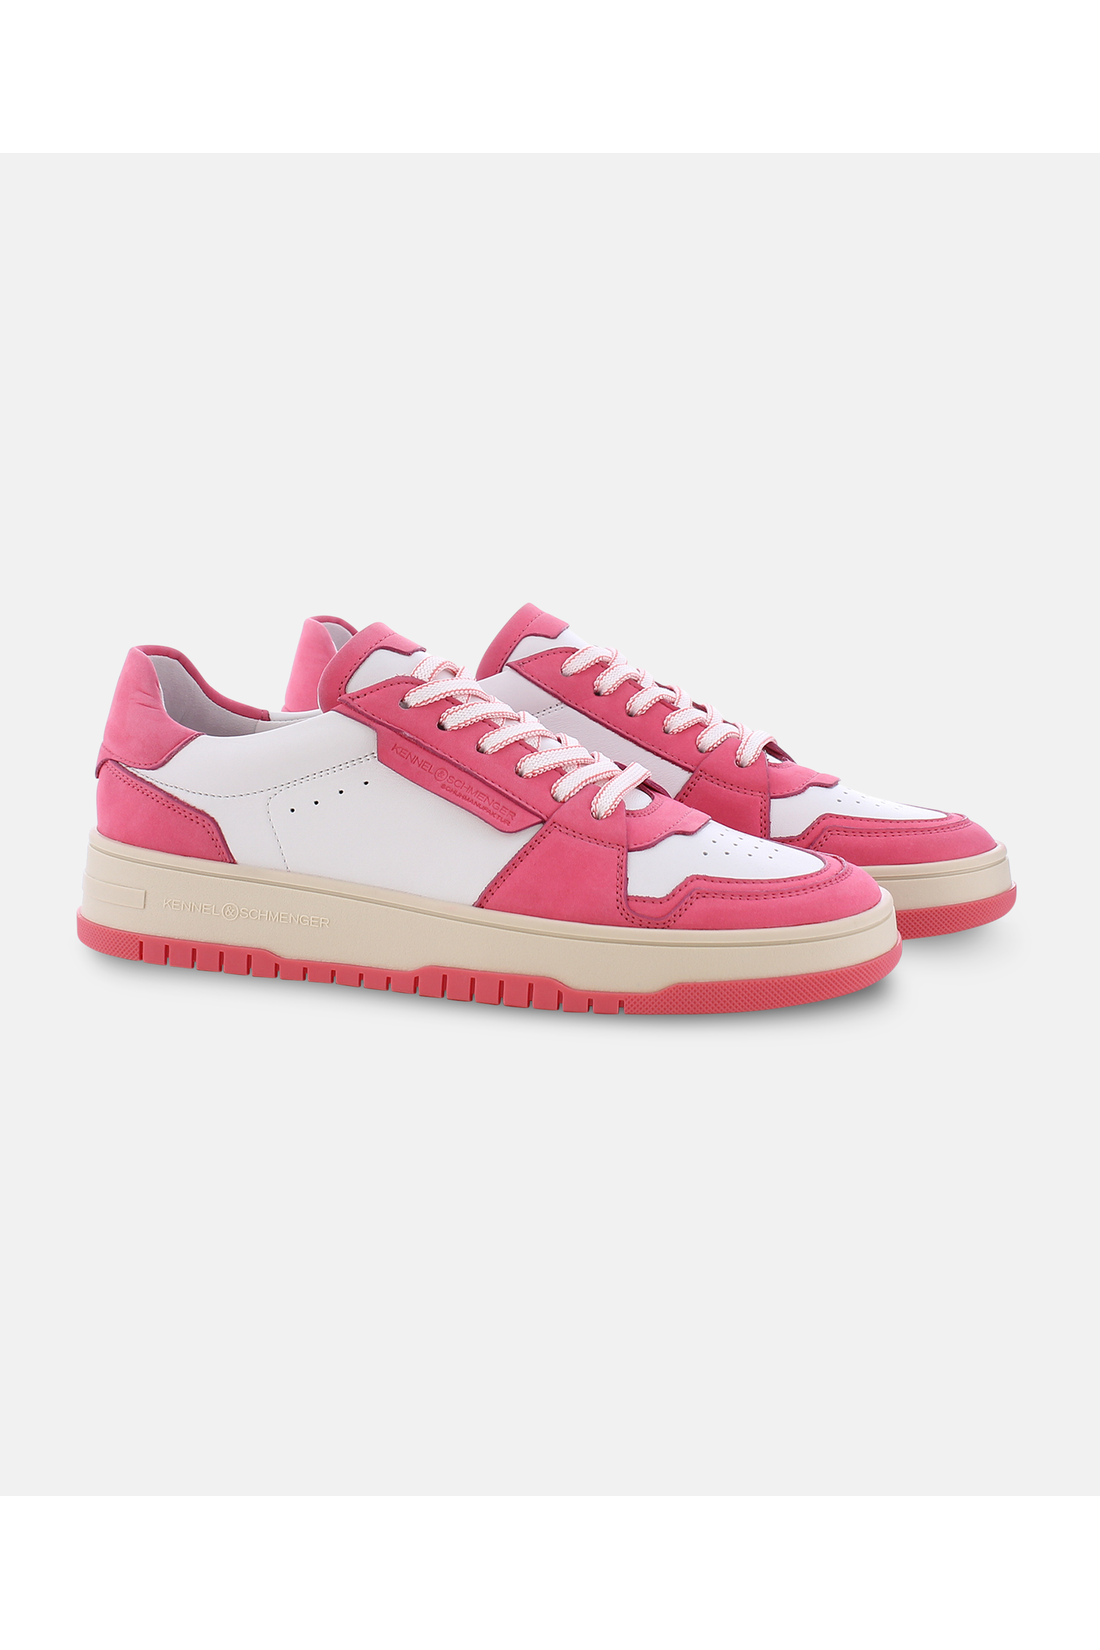 Kennel-Schmenger-OUTLET-SALE-DRIFT-Sneakers-2_5-35-Pink-ARCHIVE-COLLECTION.png